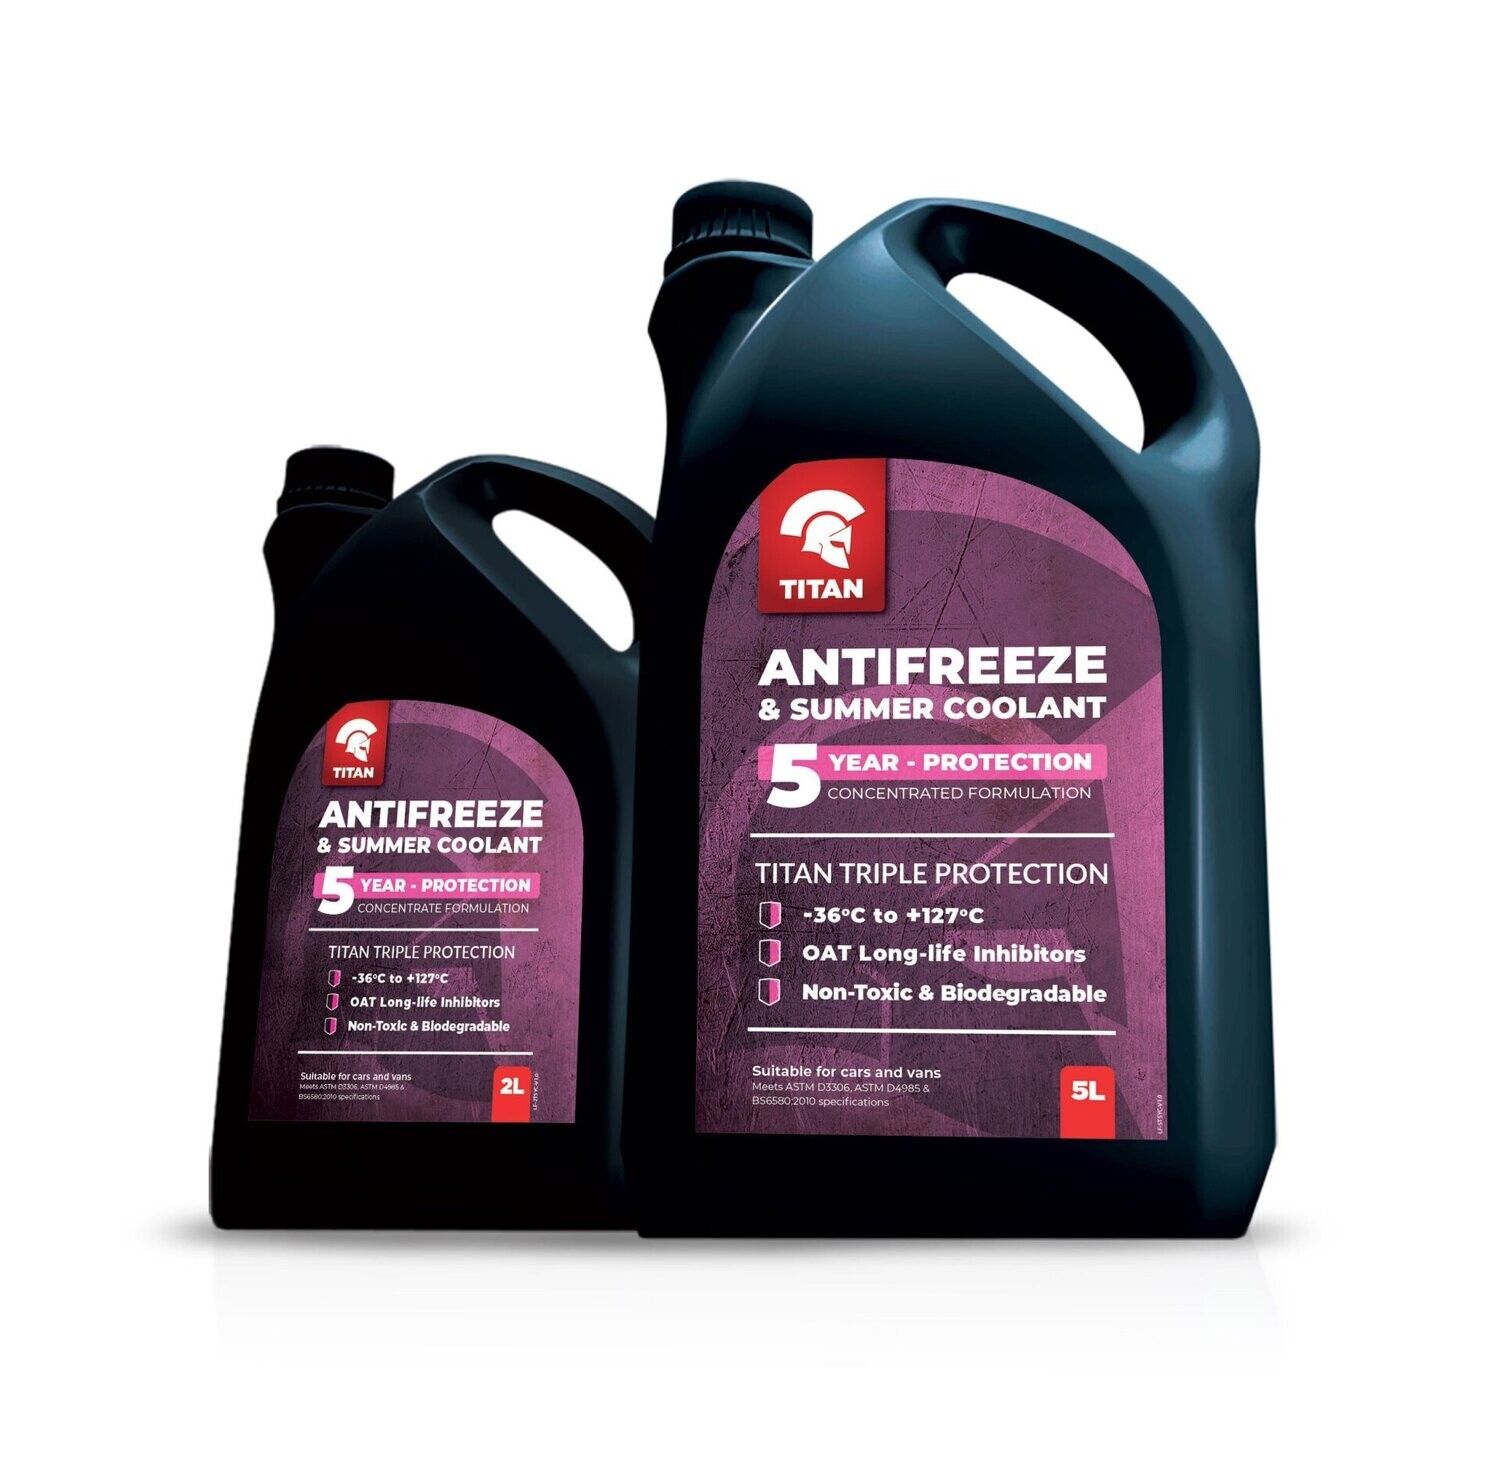 TITAN 5 YEAR ANTIFREEZE AND SUMMER COOLANT 50/50 PREMIX
READY TO USE 2 Litres